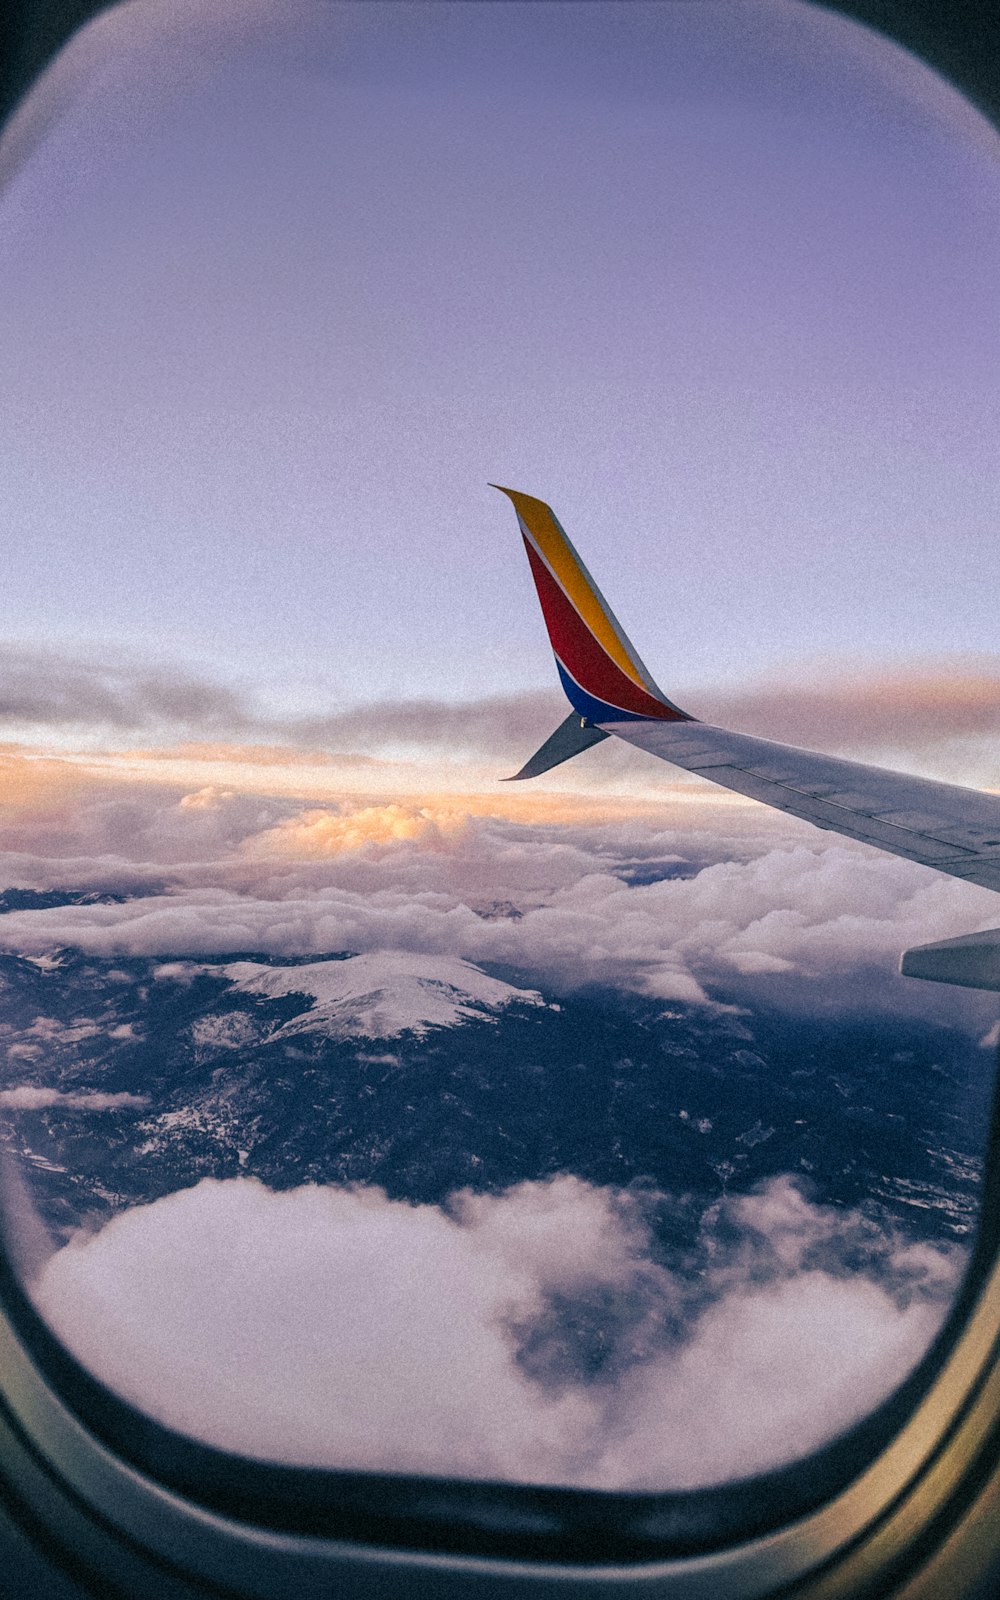 a view of the wing of an airplane over clouds